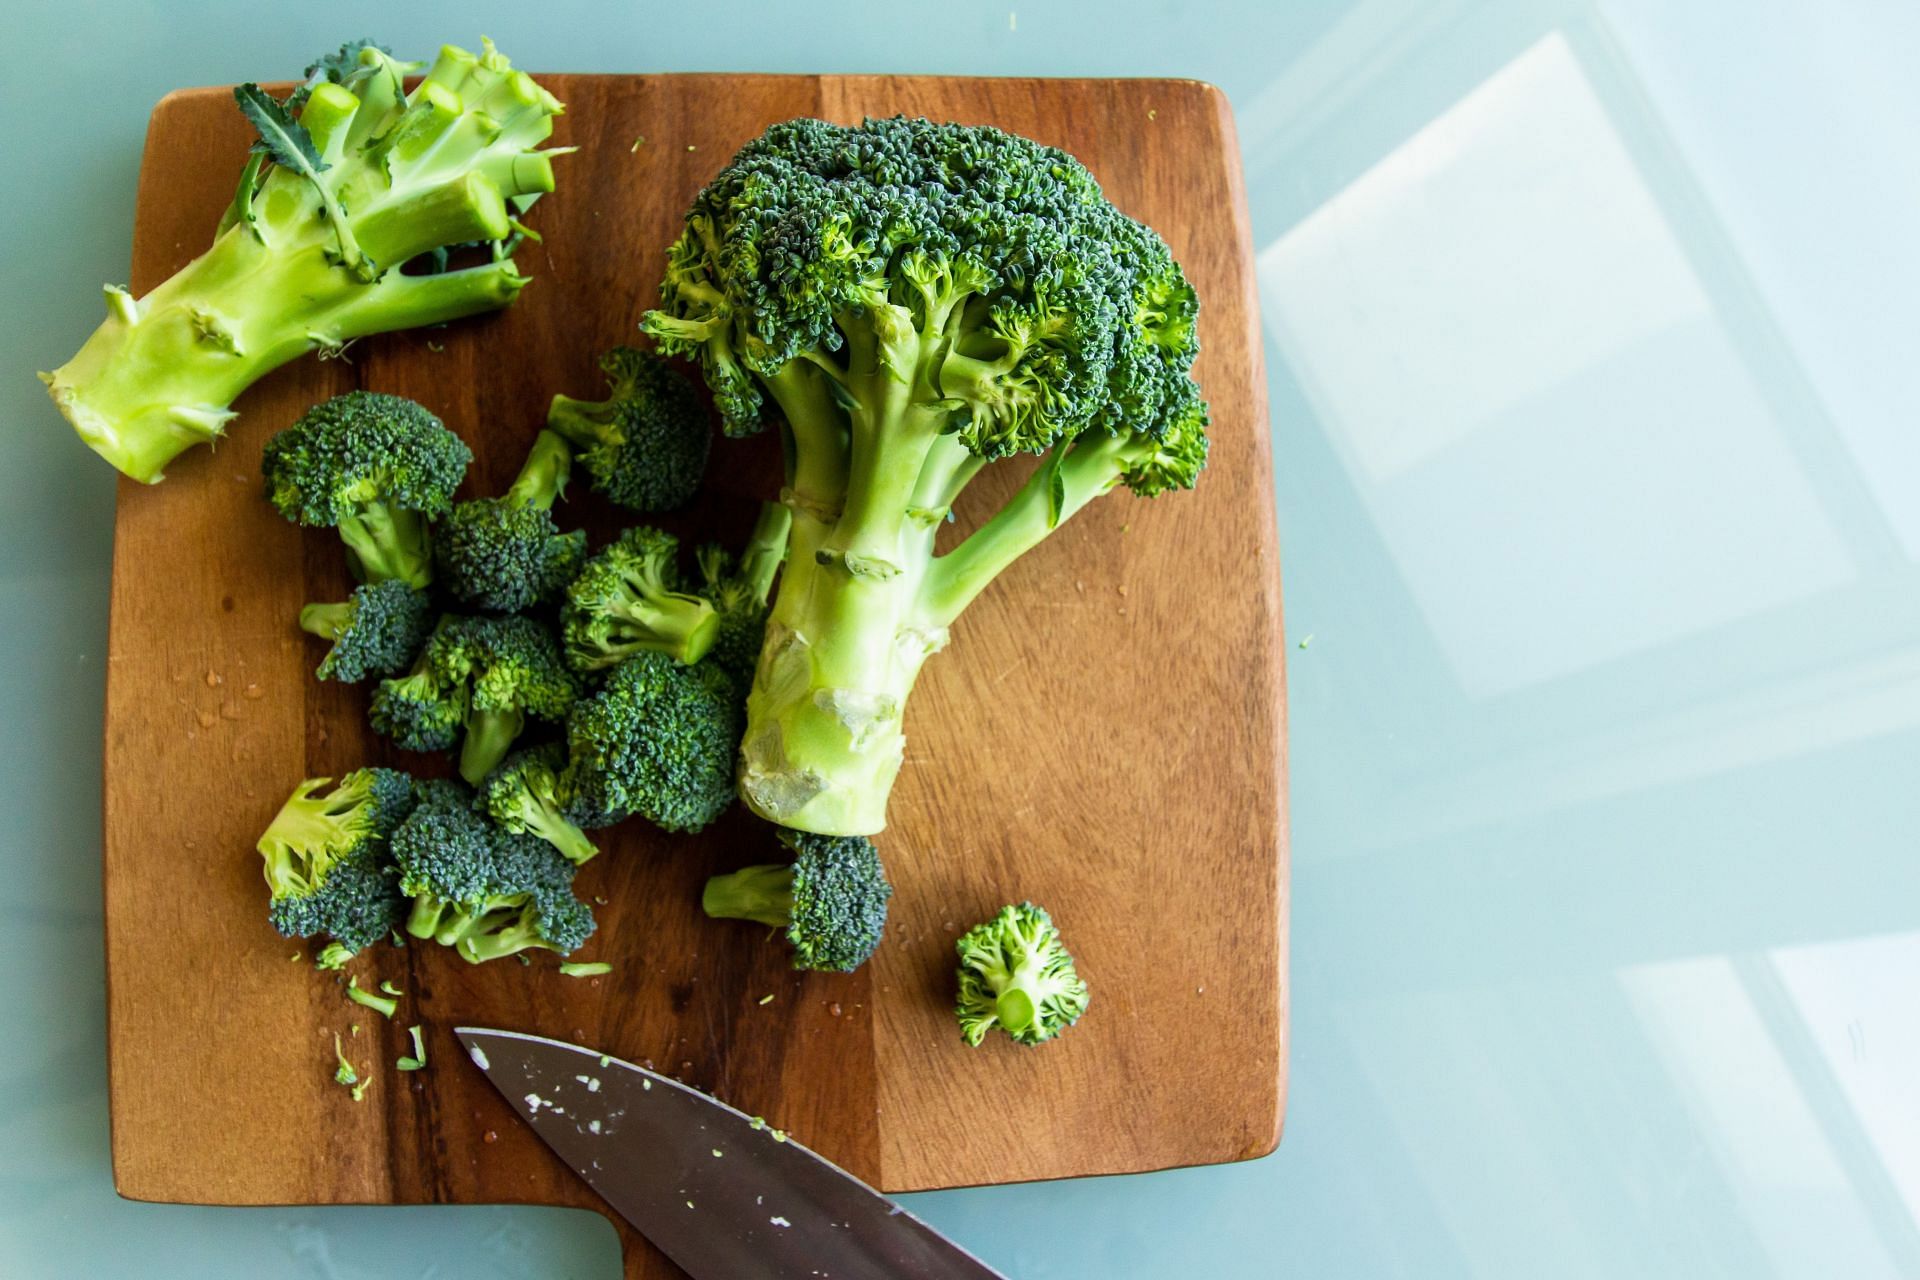 Broccoli is great for weight loss. (Image via Unsplash/Louis Hansel)